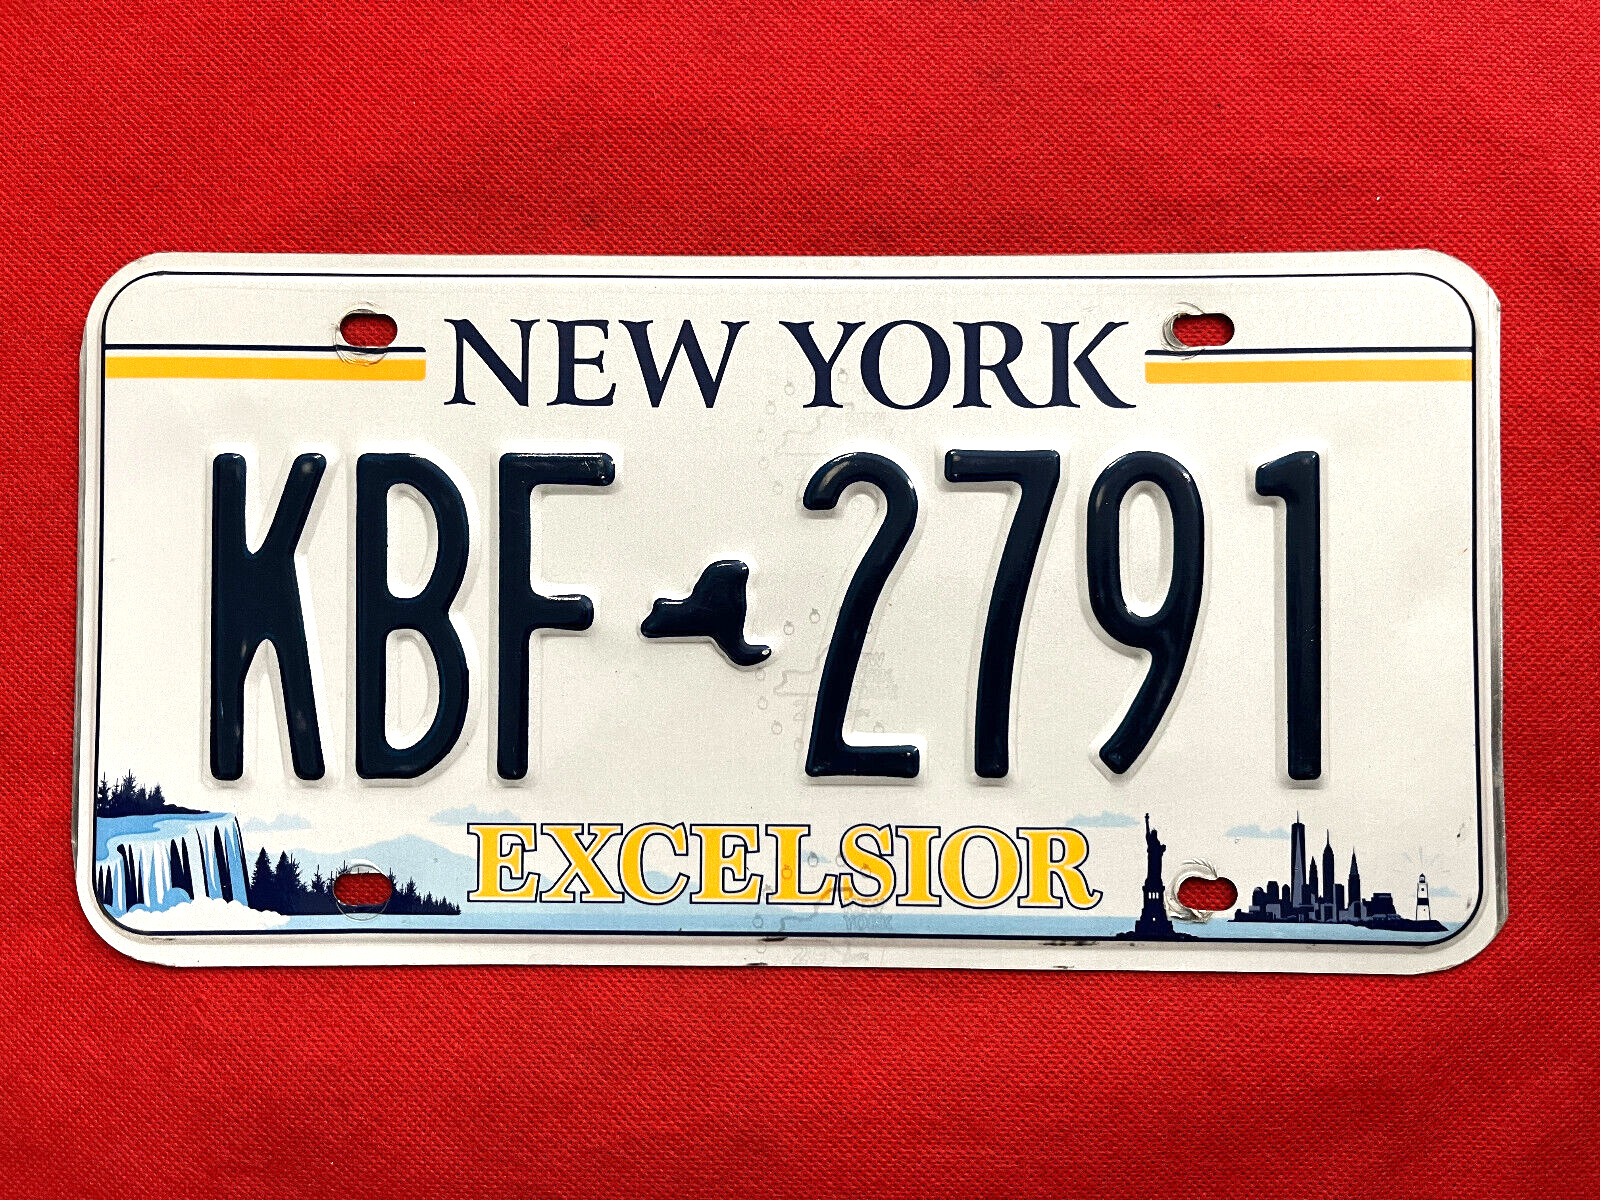 New York License Plate KBF-2791 ..... Expired / Crafts / Collect / Specialty